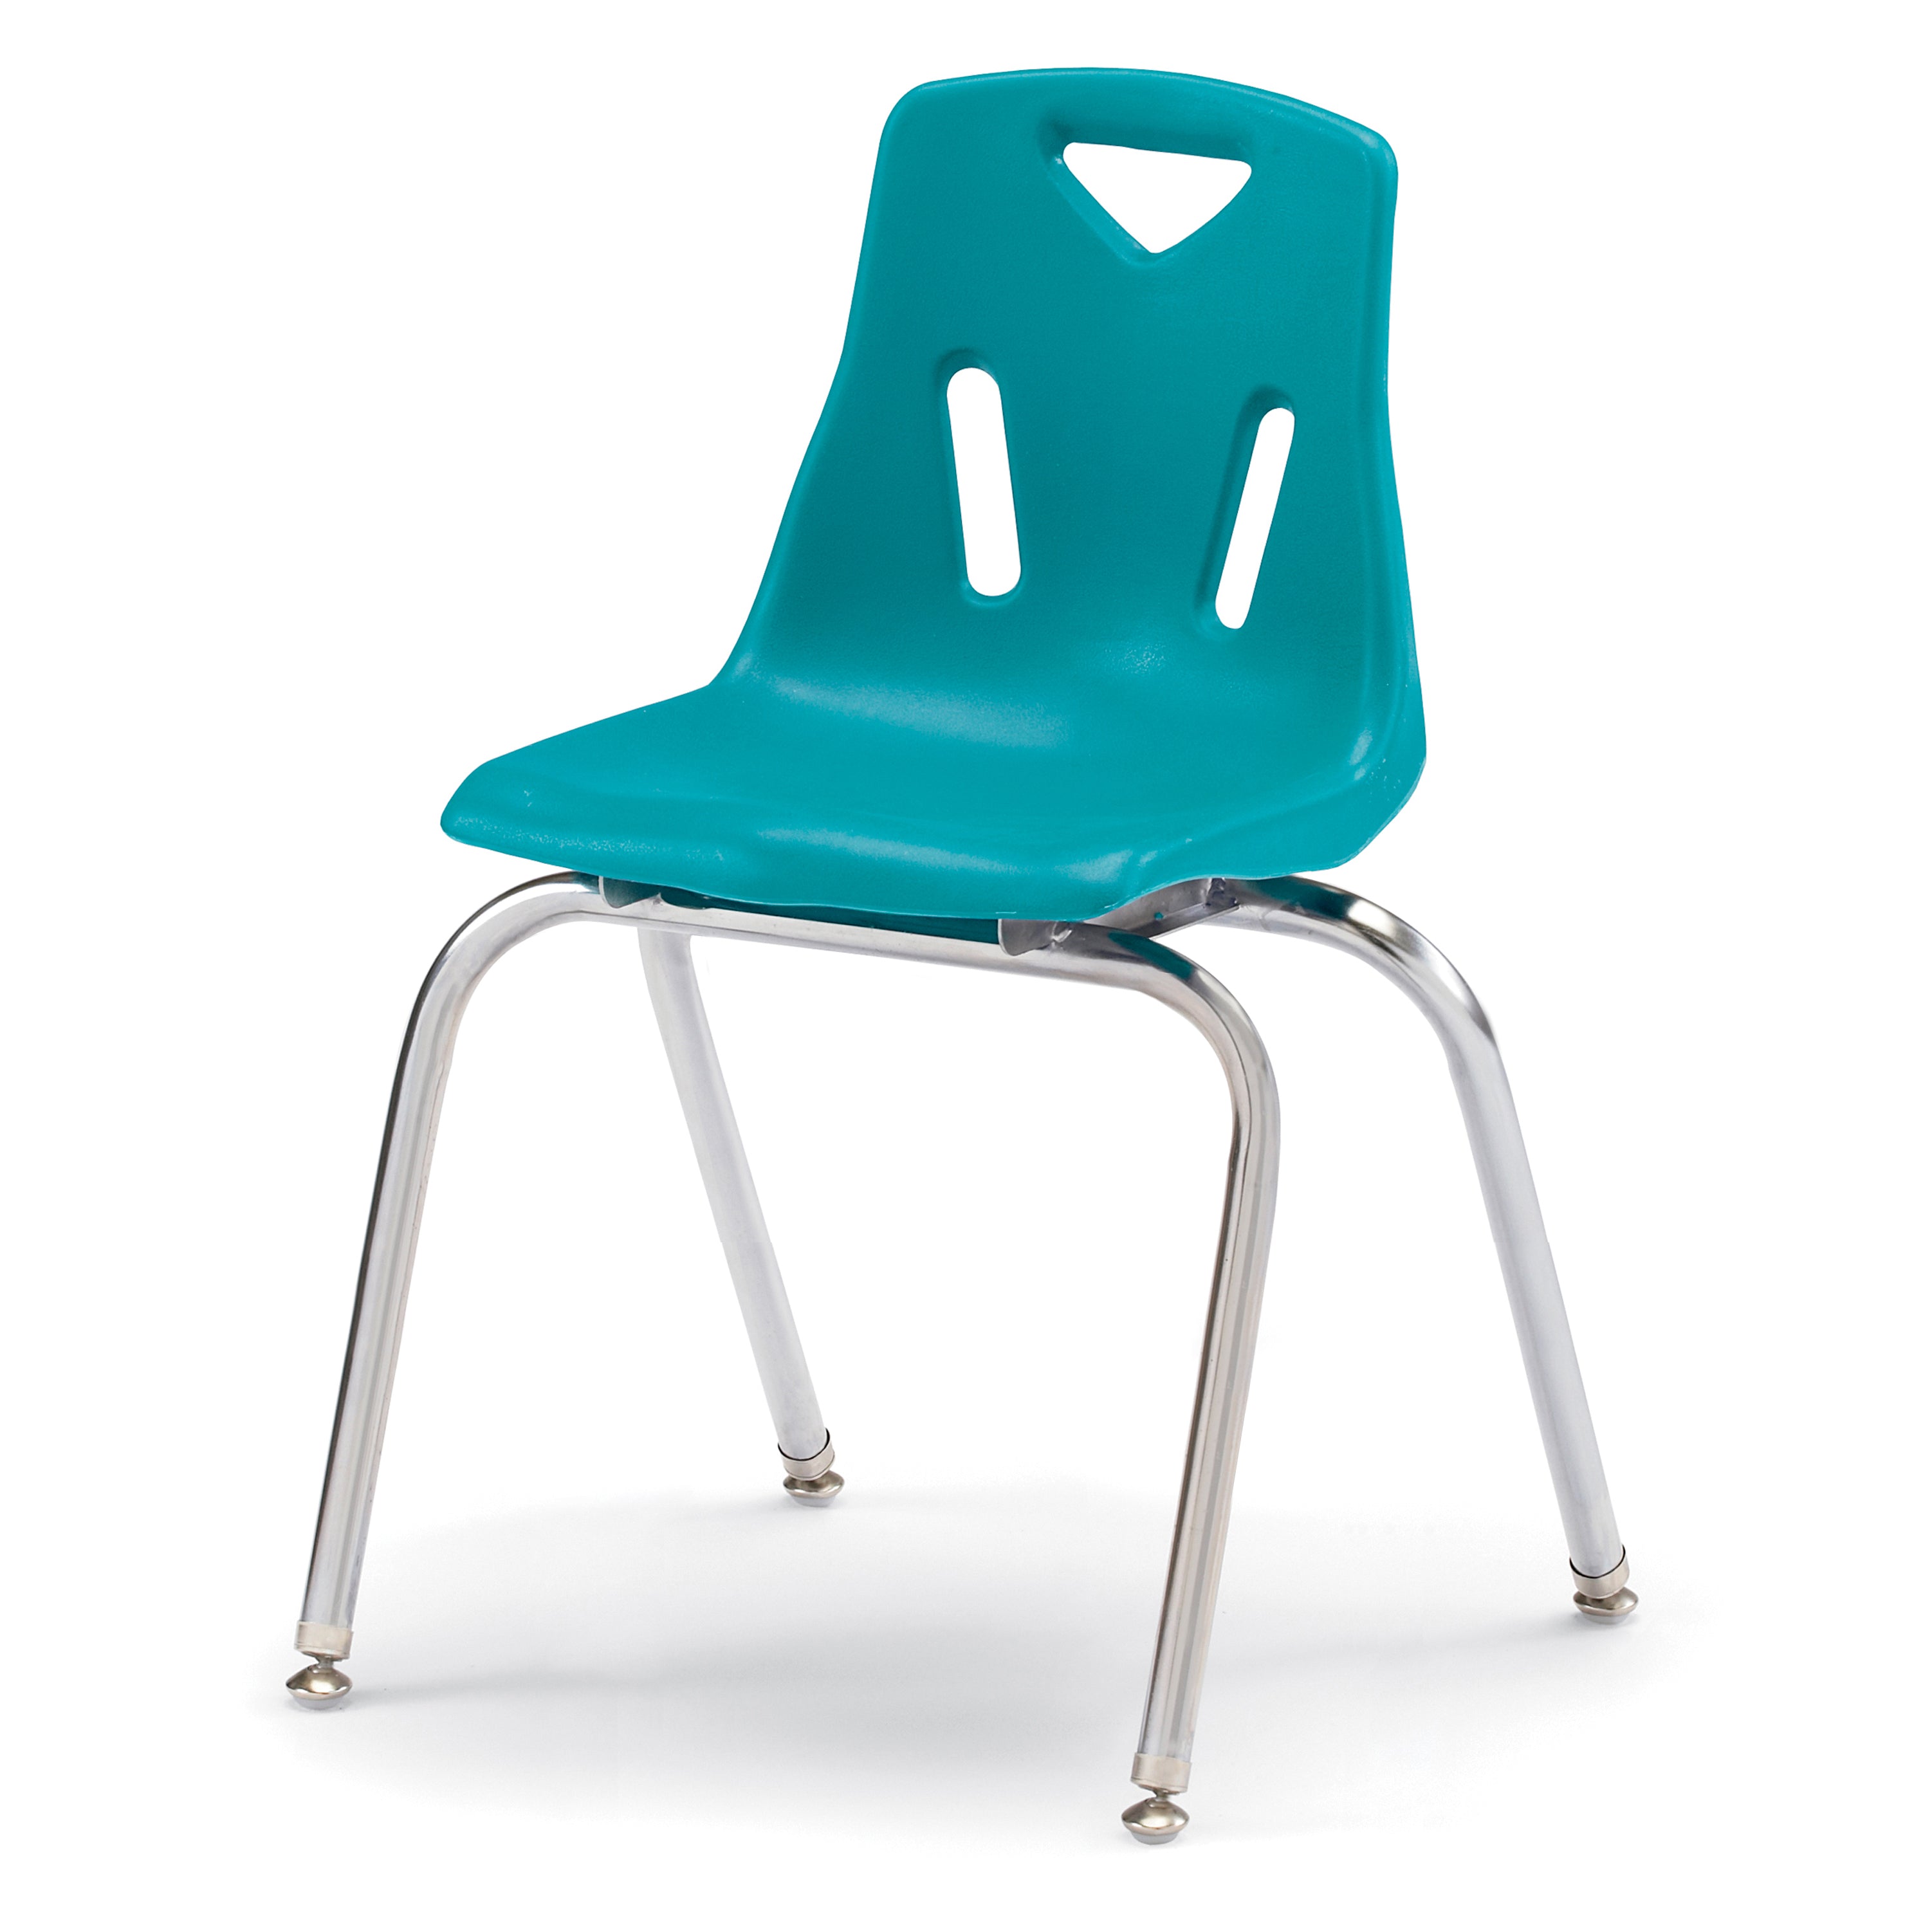 8148JC6005, Berries Stacking Chairs with Chrome-Plated Legs - 18" Ht - Set of 6 - Teal